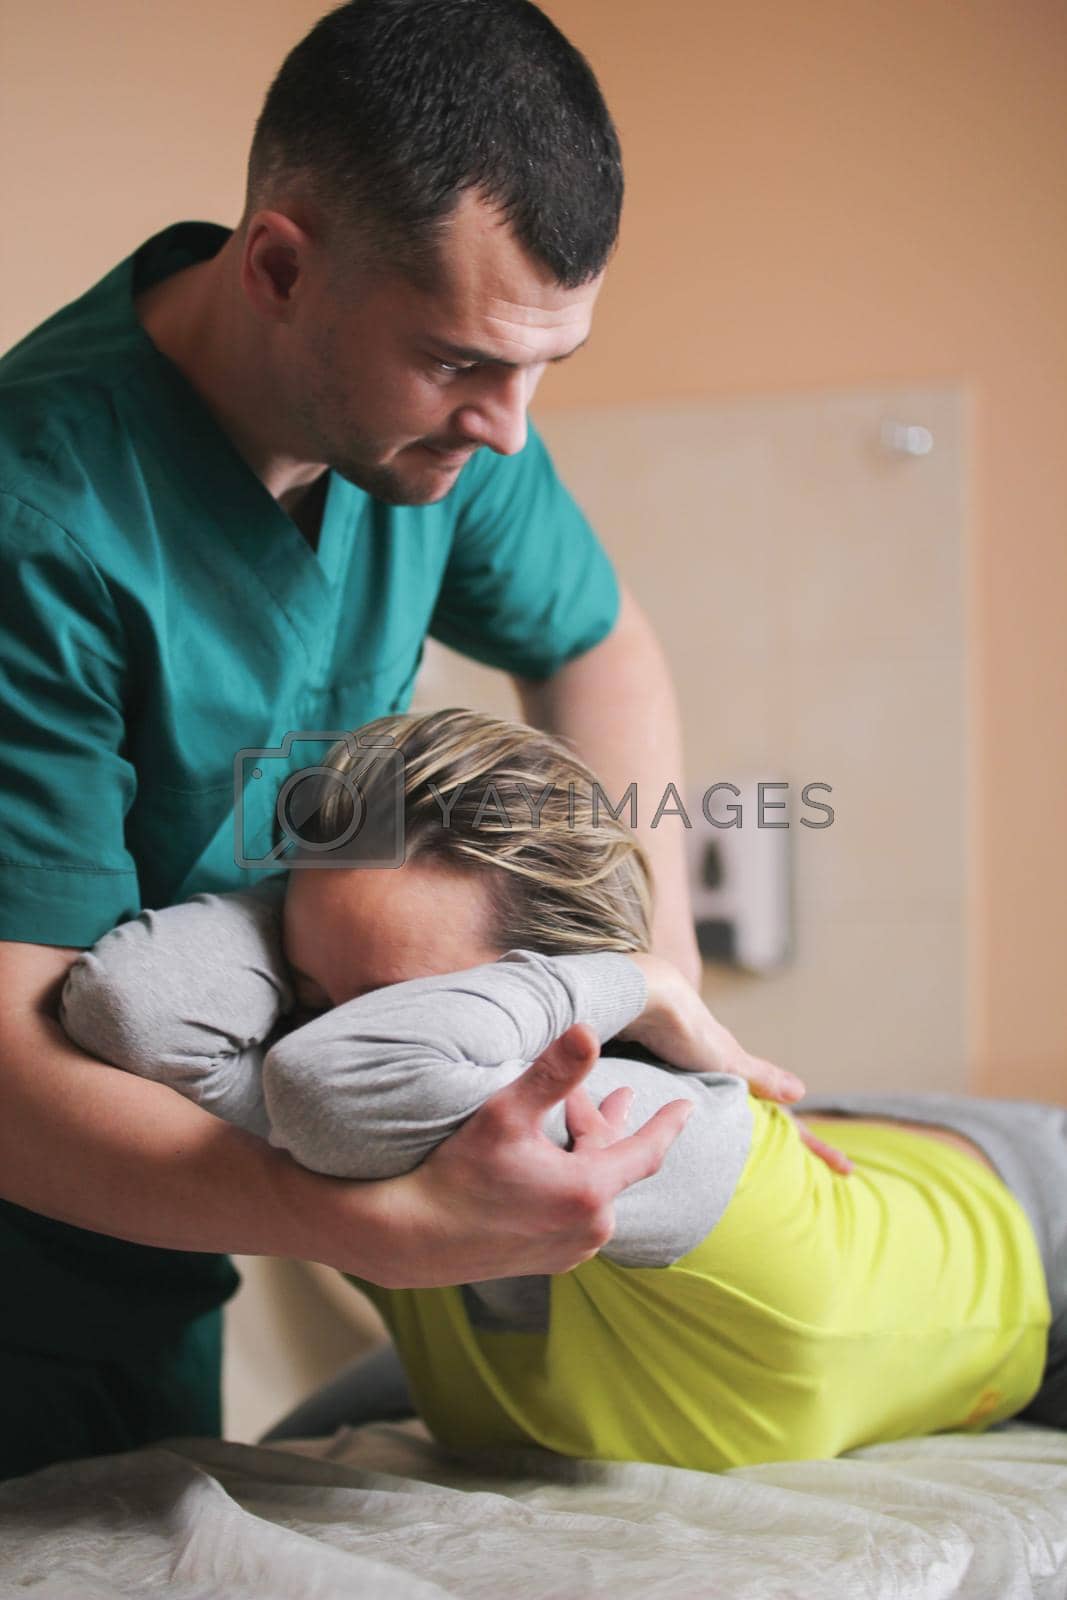 Royalty free image of Doctor osteopath have manual therapy for woman's neck by Studia72